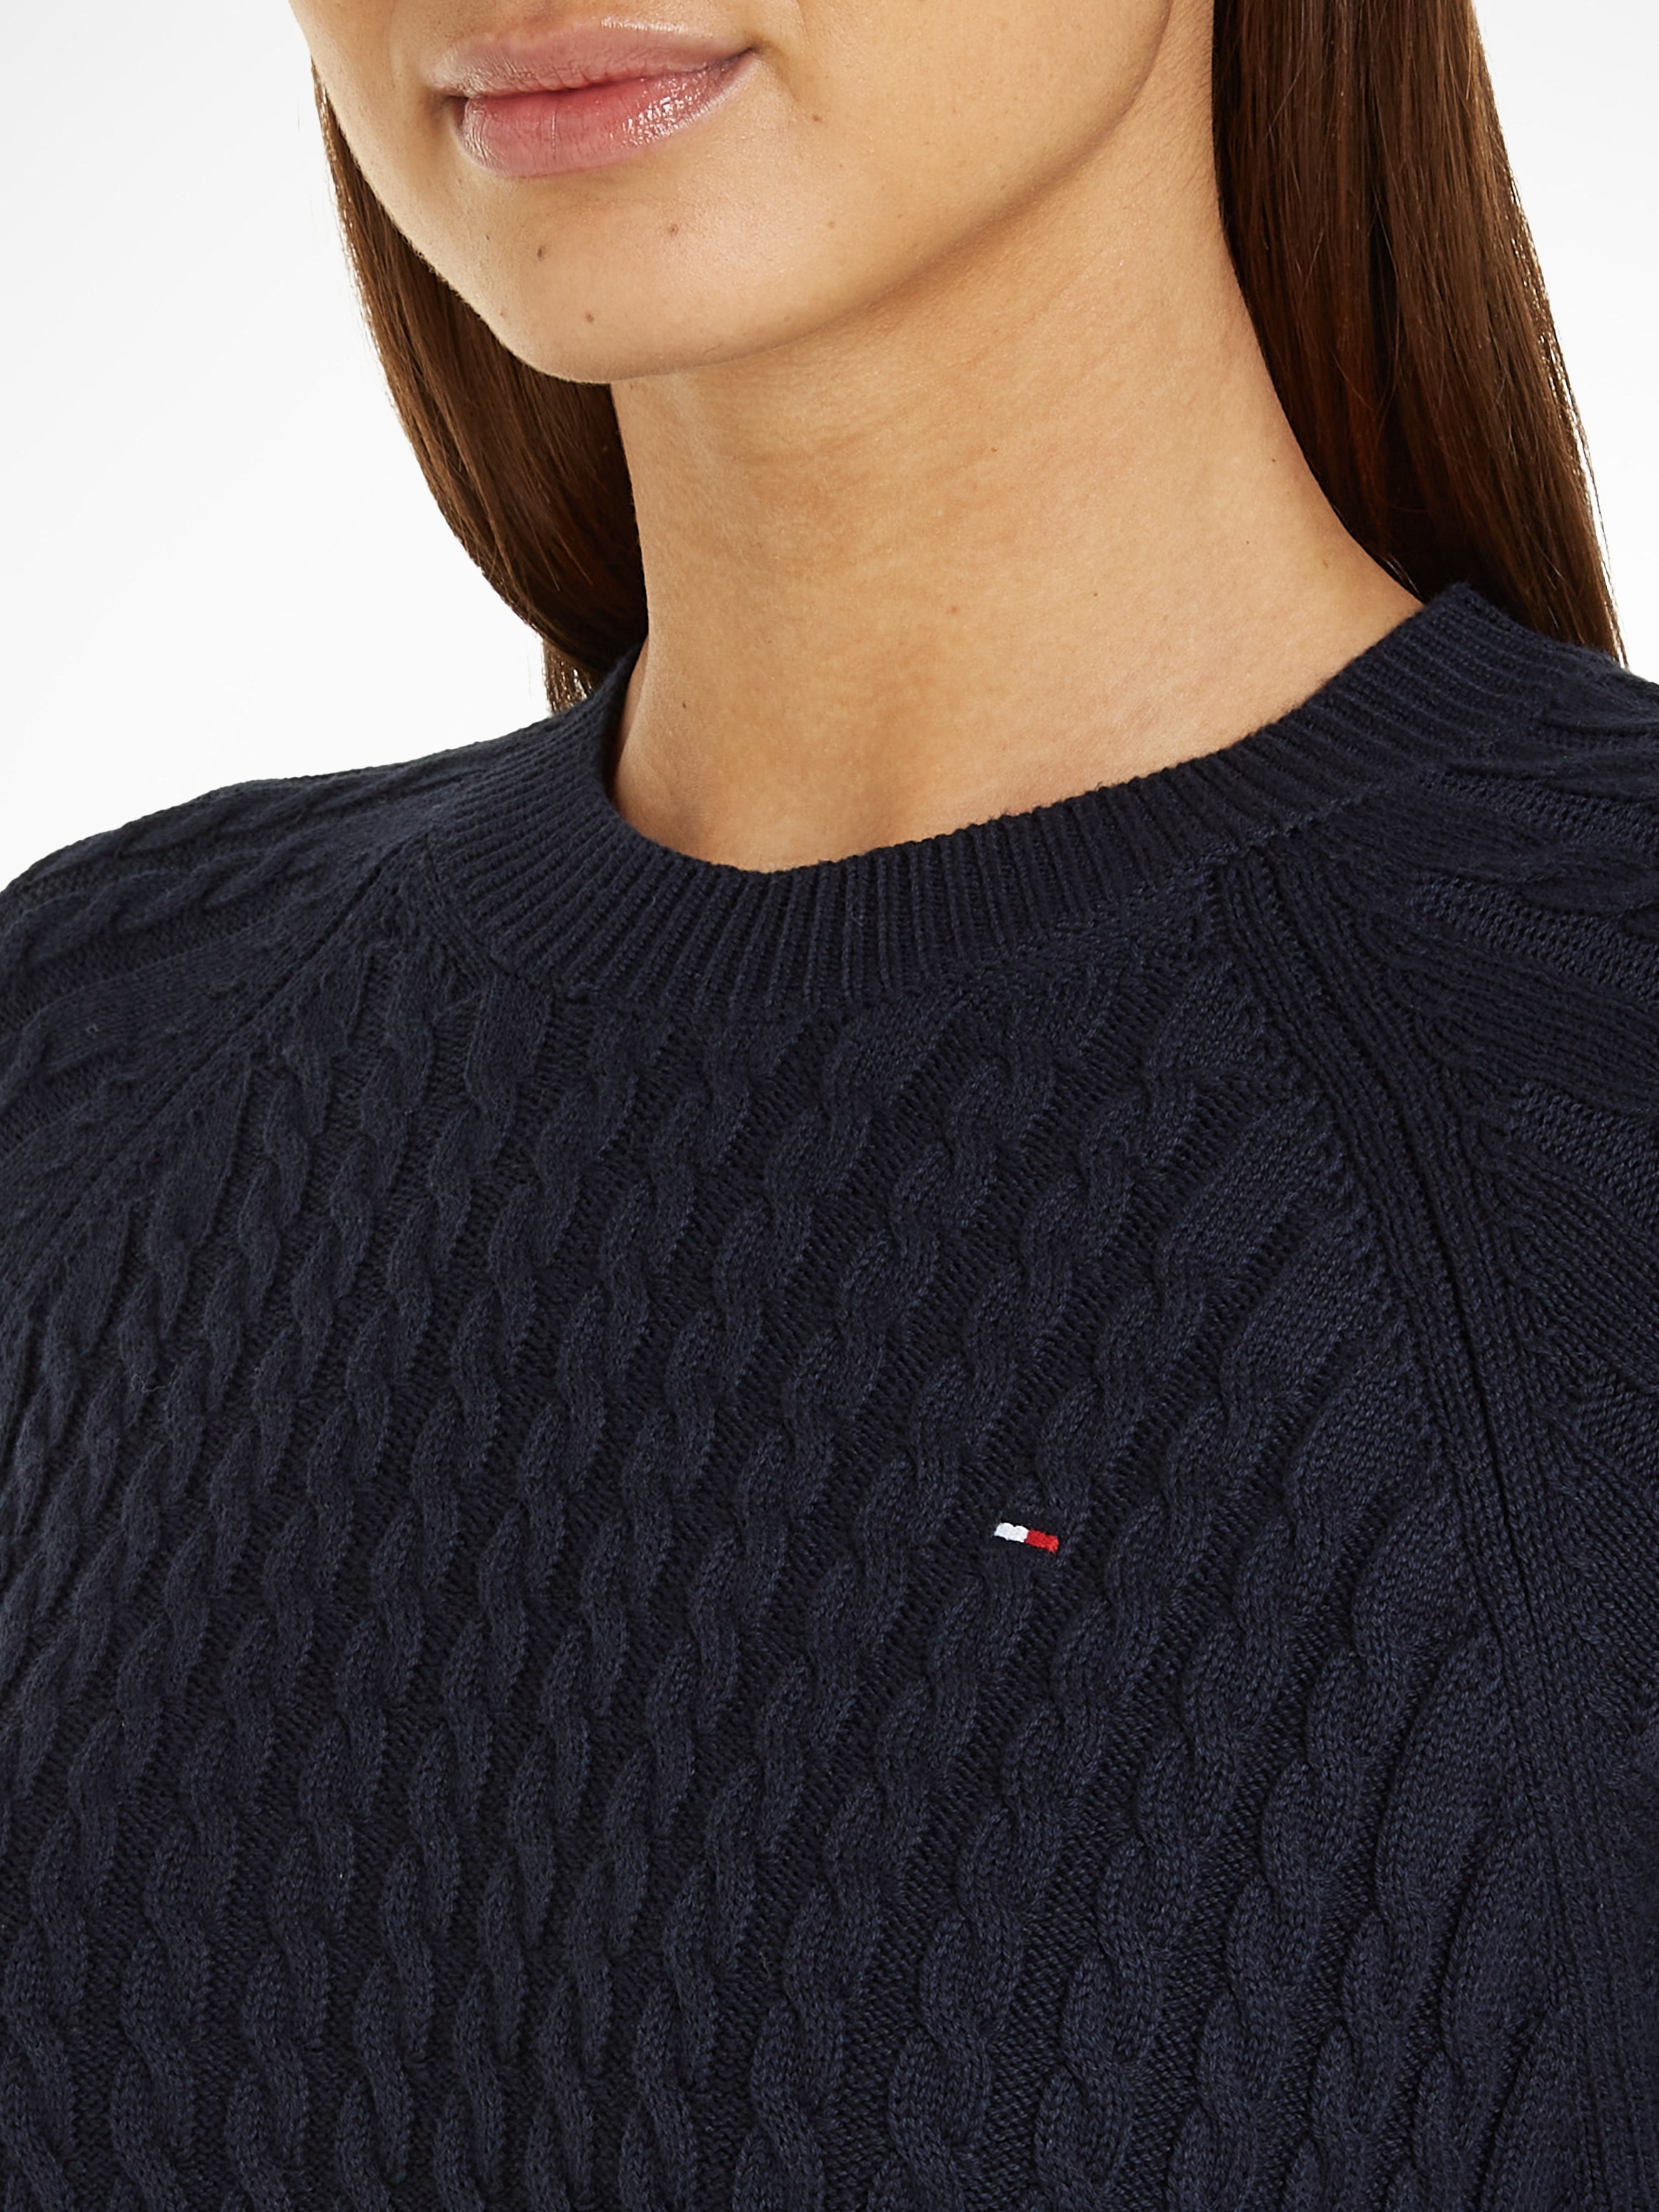 ♕ Tommy Hilfiger Rundhalspullover C-NK CABLE Zopfmuster »CO mit SWEATER«, bei